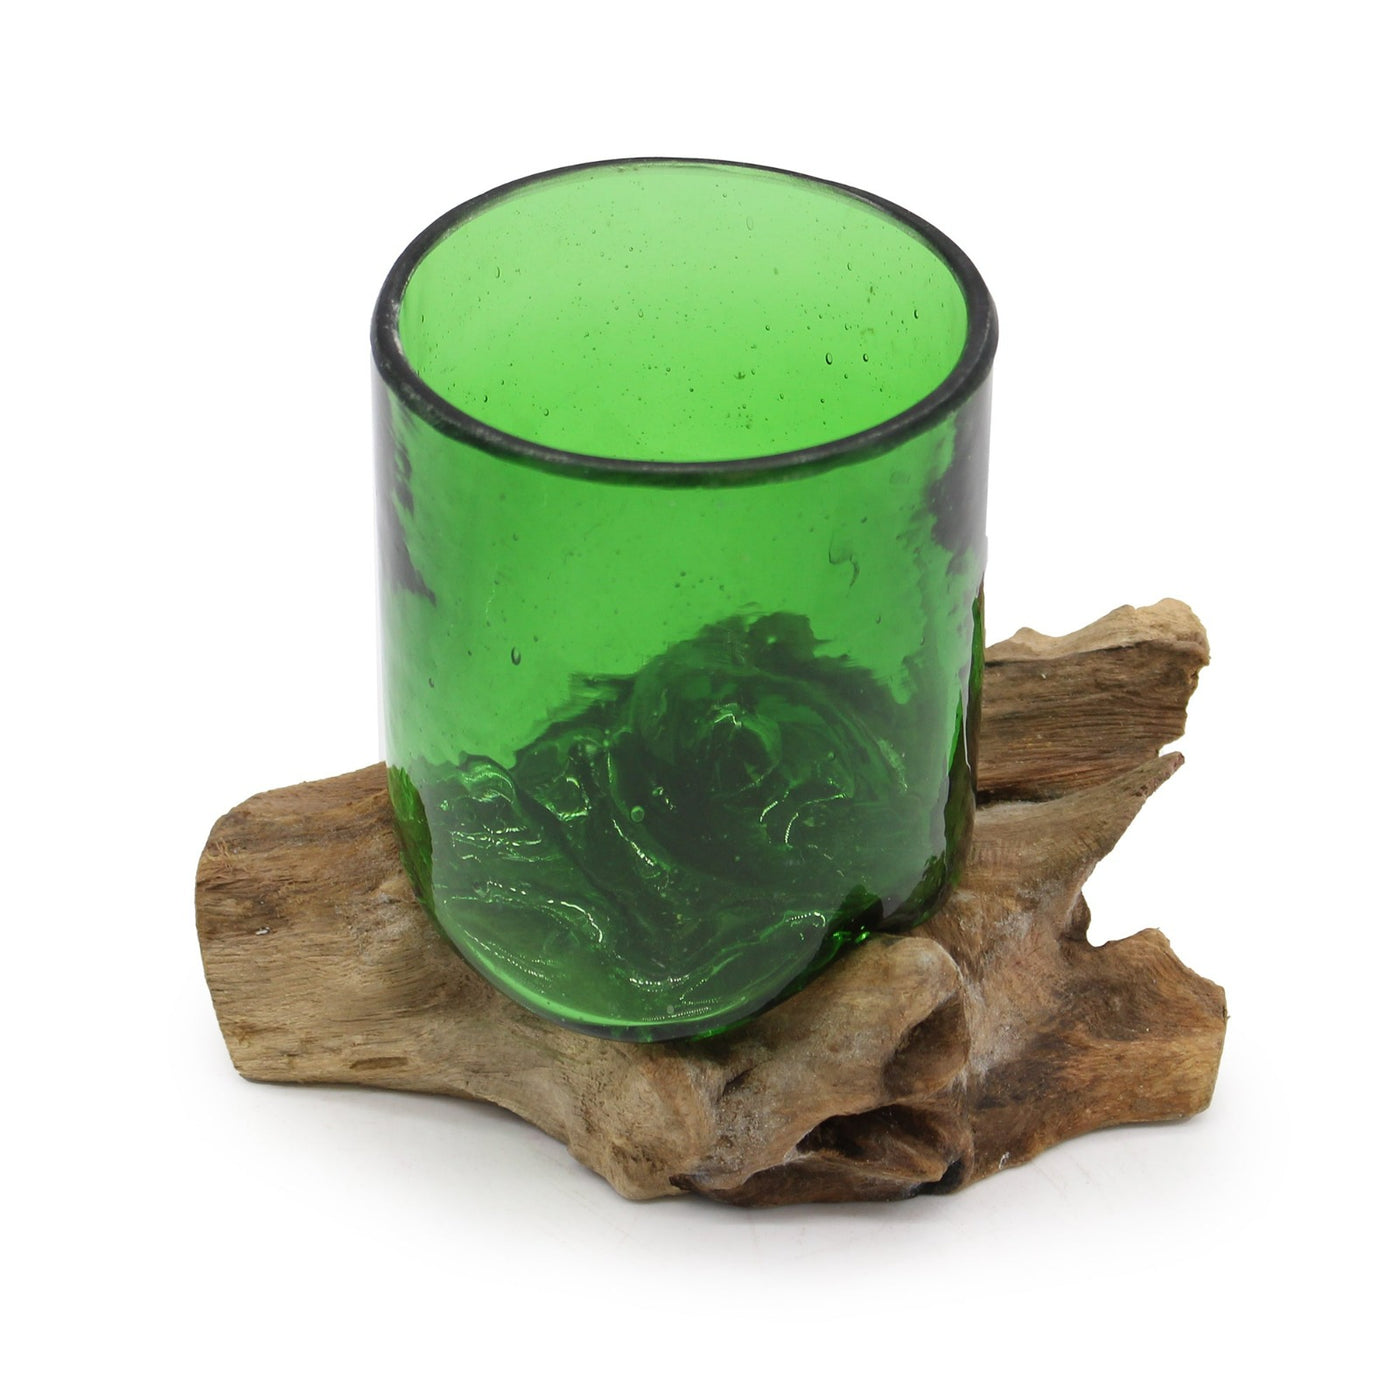 Sustainable Recycled Green Novelty Beer Glass On Wooden Base Novelty Natural Gift.